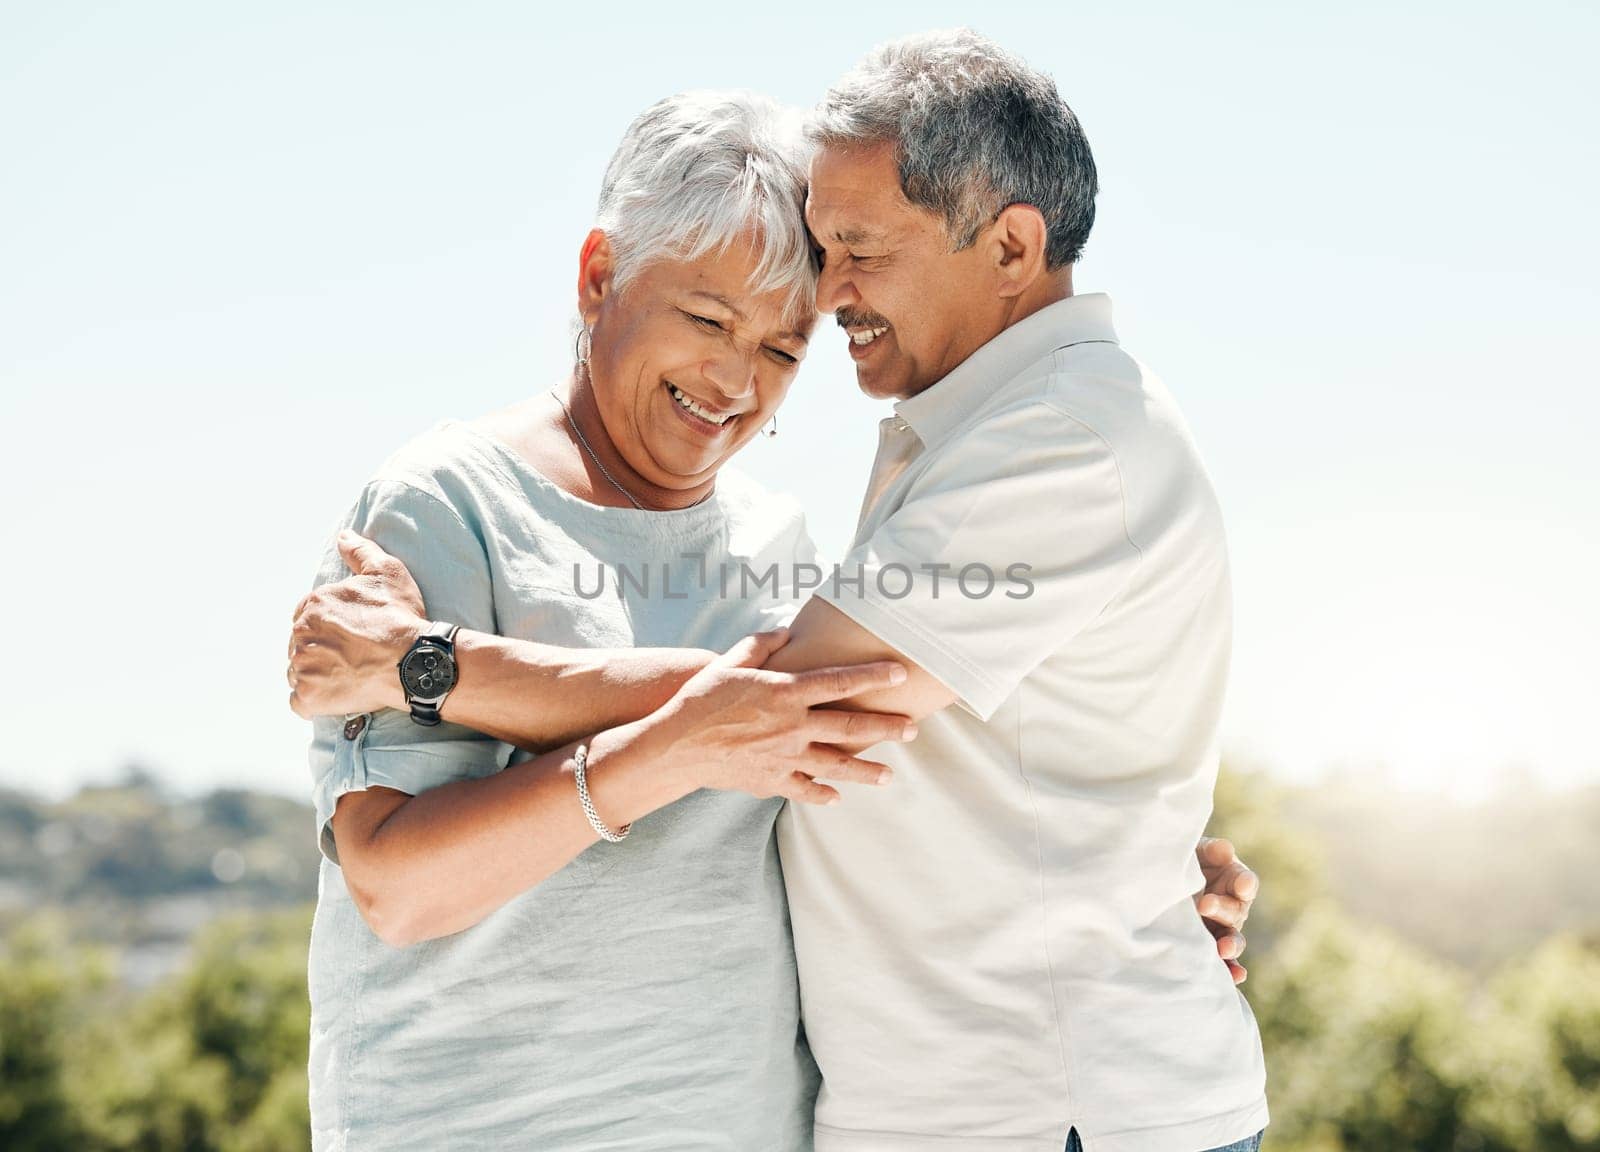 Senior couple, hug and happy in nature on vacation, holiday or summer bonding. Love, hugging and retirement of man and woman with a smile and enjoying quality time together on intimate date mockup